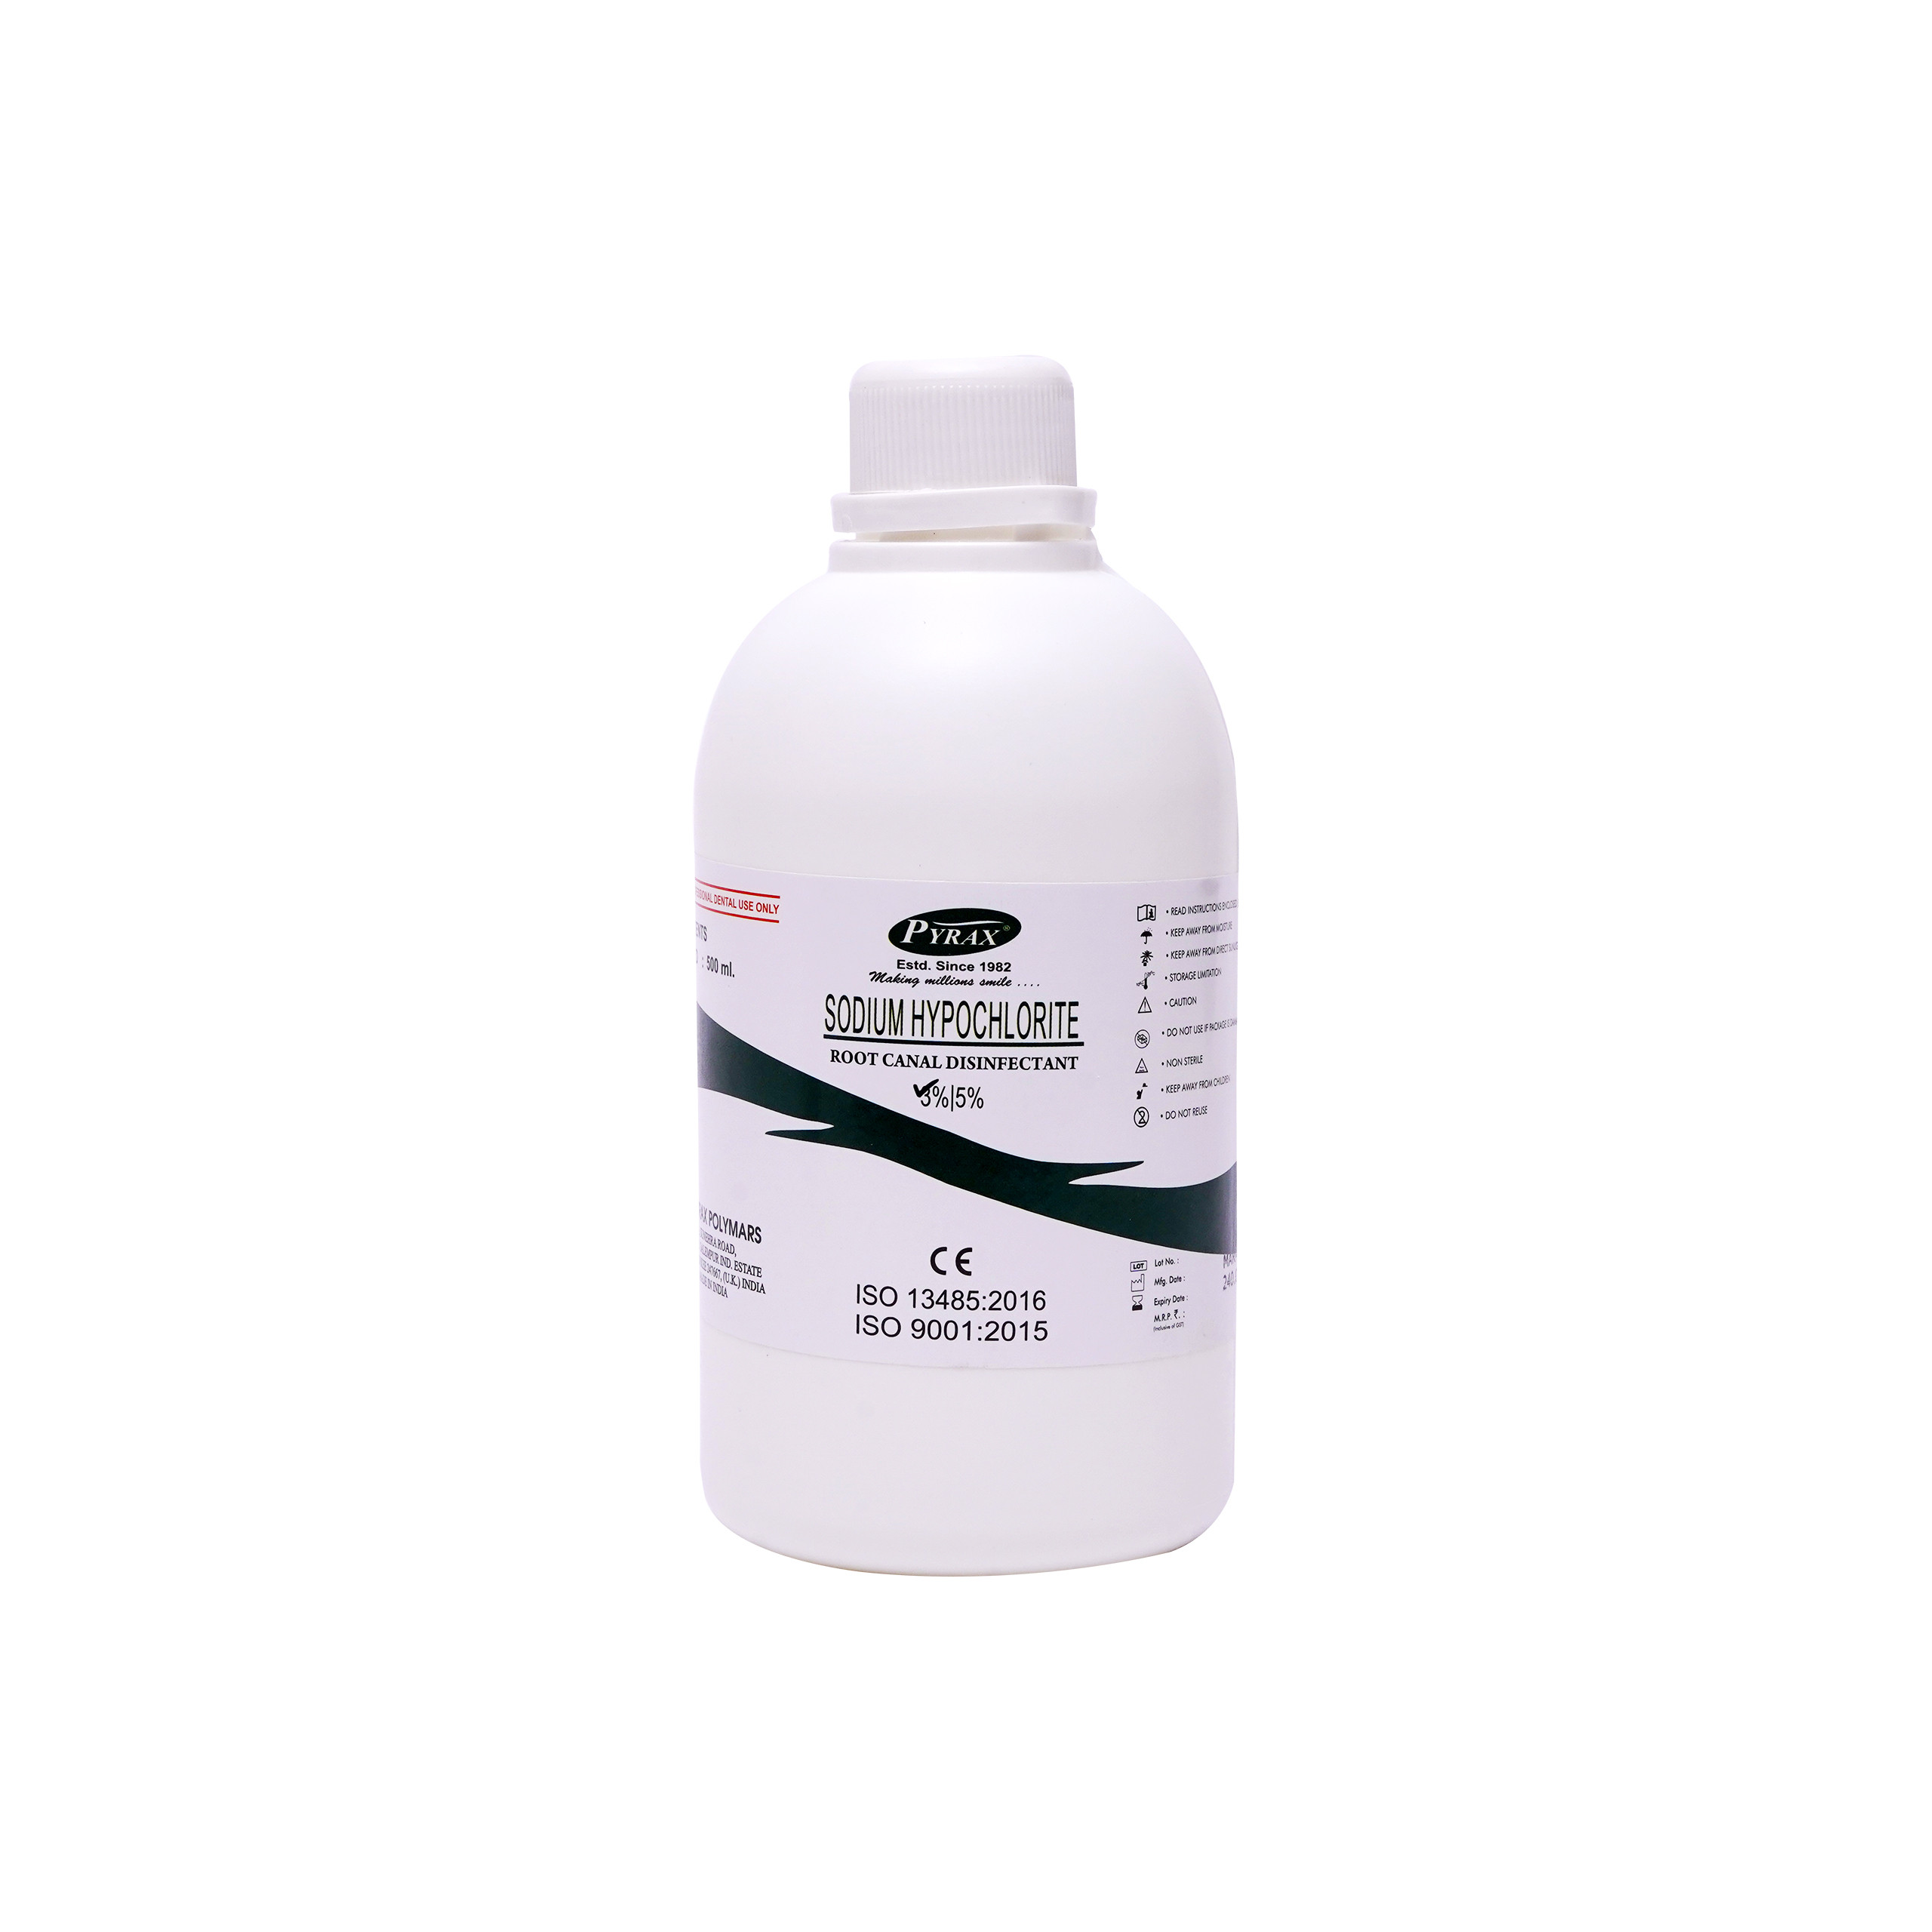 Coltene Sodium Hypochlorite Root Canal Disinfectant